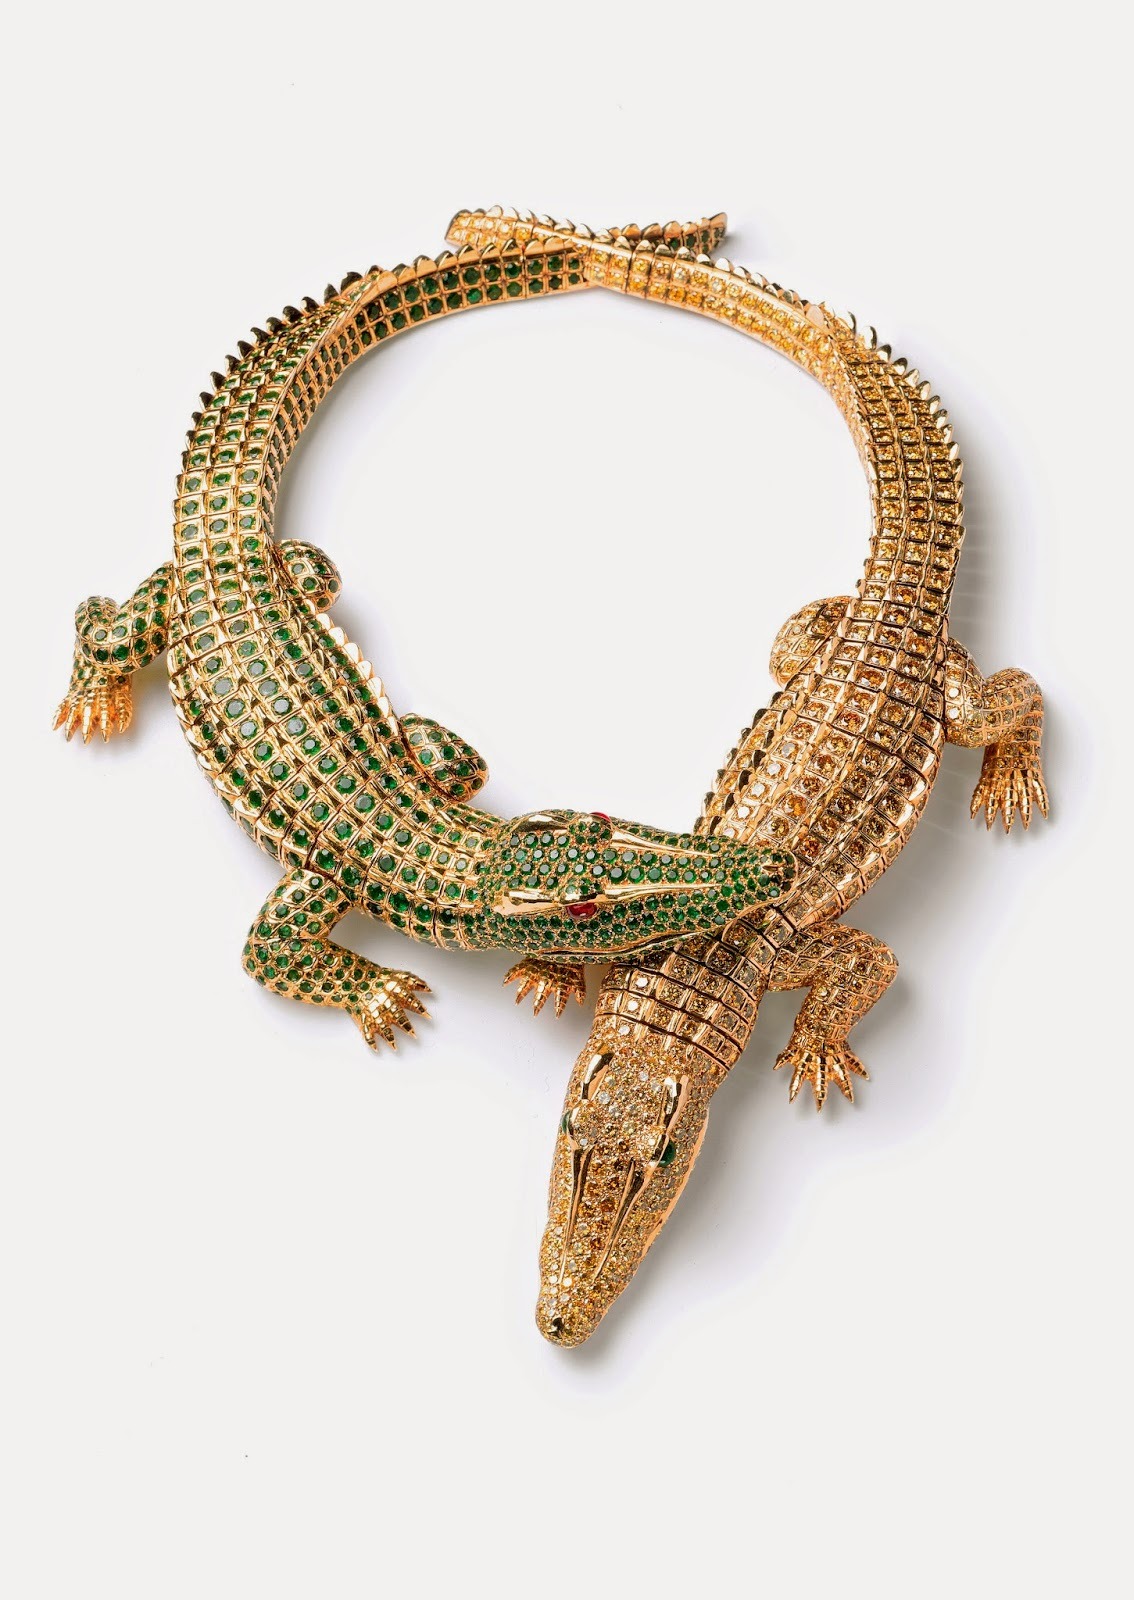 Crocodile Necklace made for Maria Félix.Cartier Paris, special order, 1975. Gold, diamonds, emeralds, rubies; Cartier Collection. Photo credit: Nick Welsh